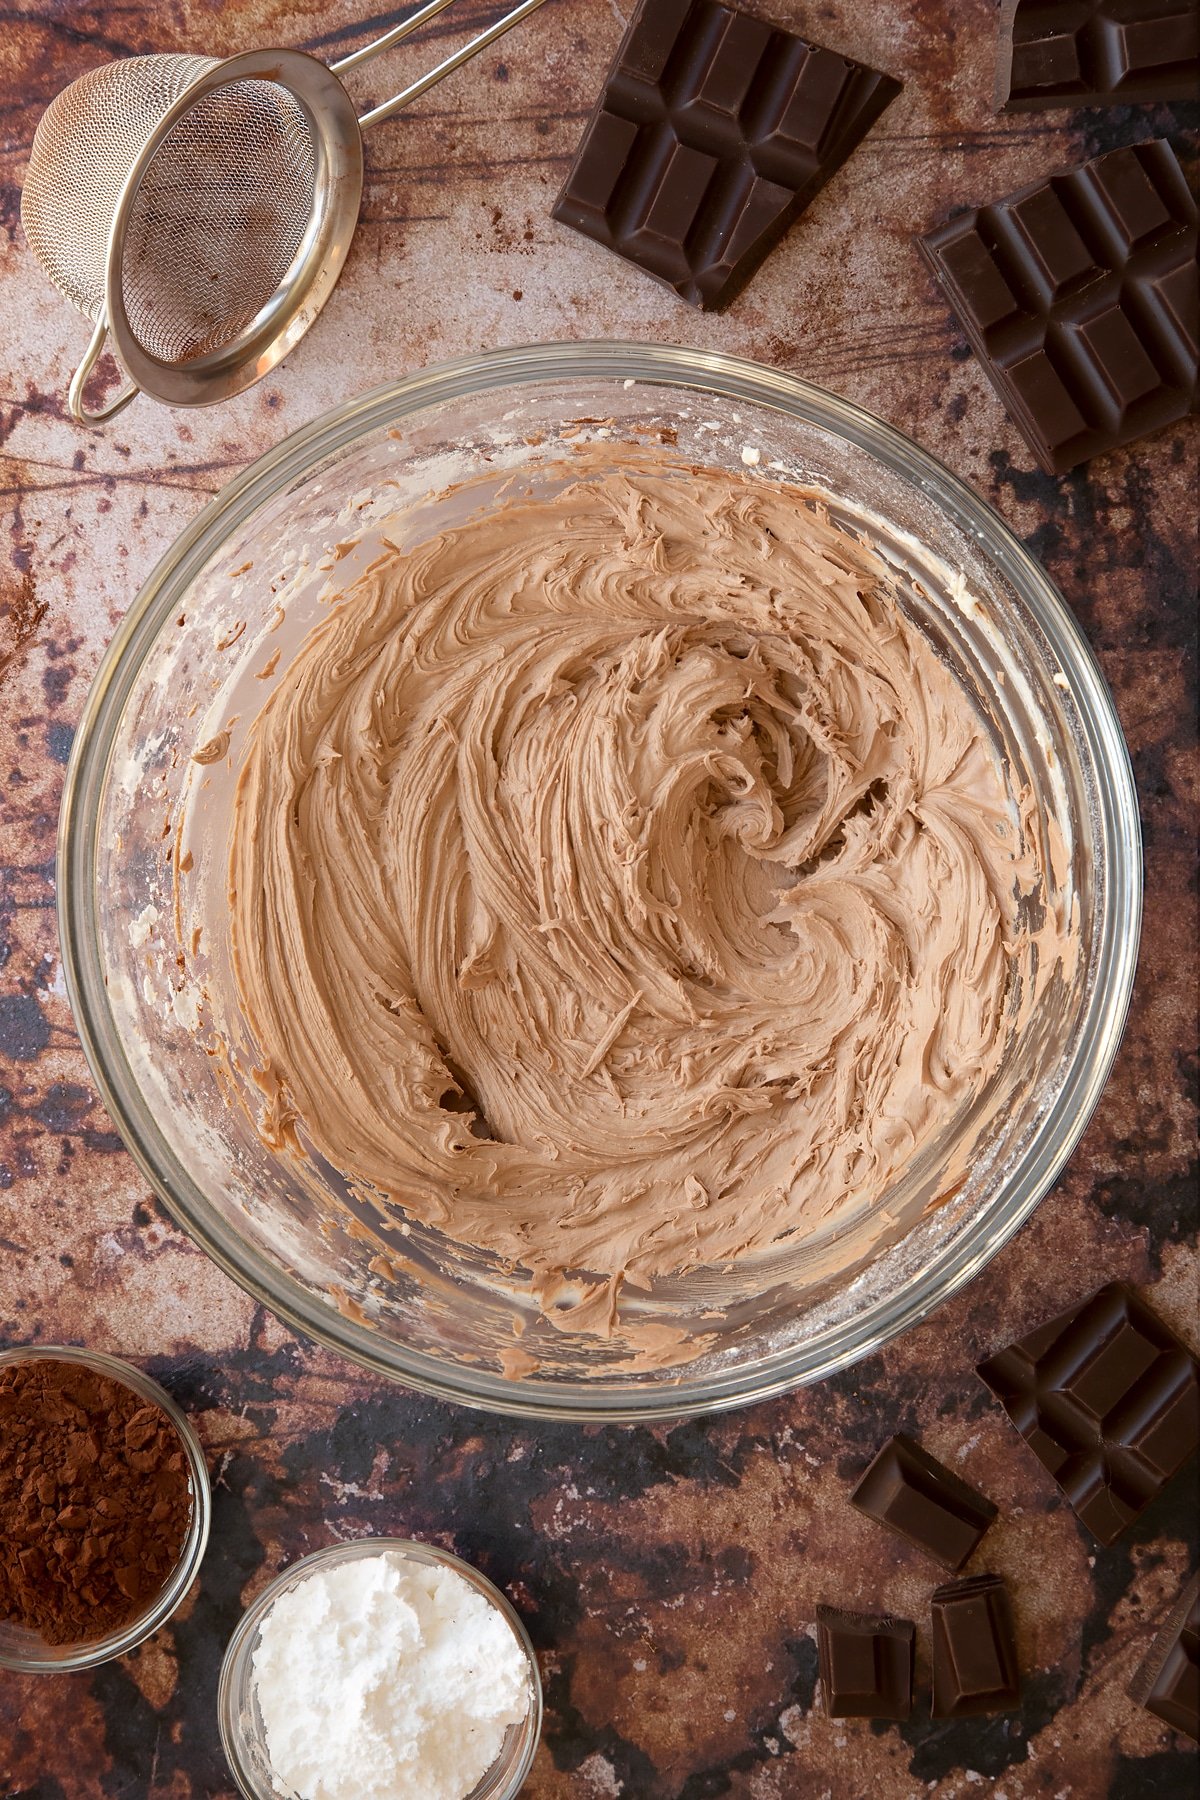 Chocolate buttercream in a glass mixing bowl. Ingredients for the caterpillar cake recipe surround the bowl.